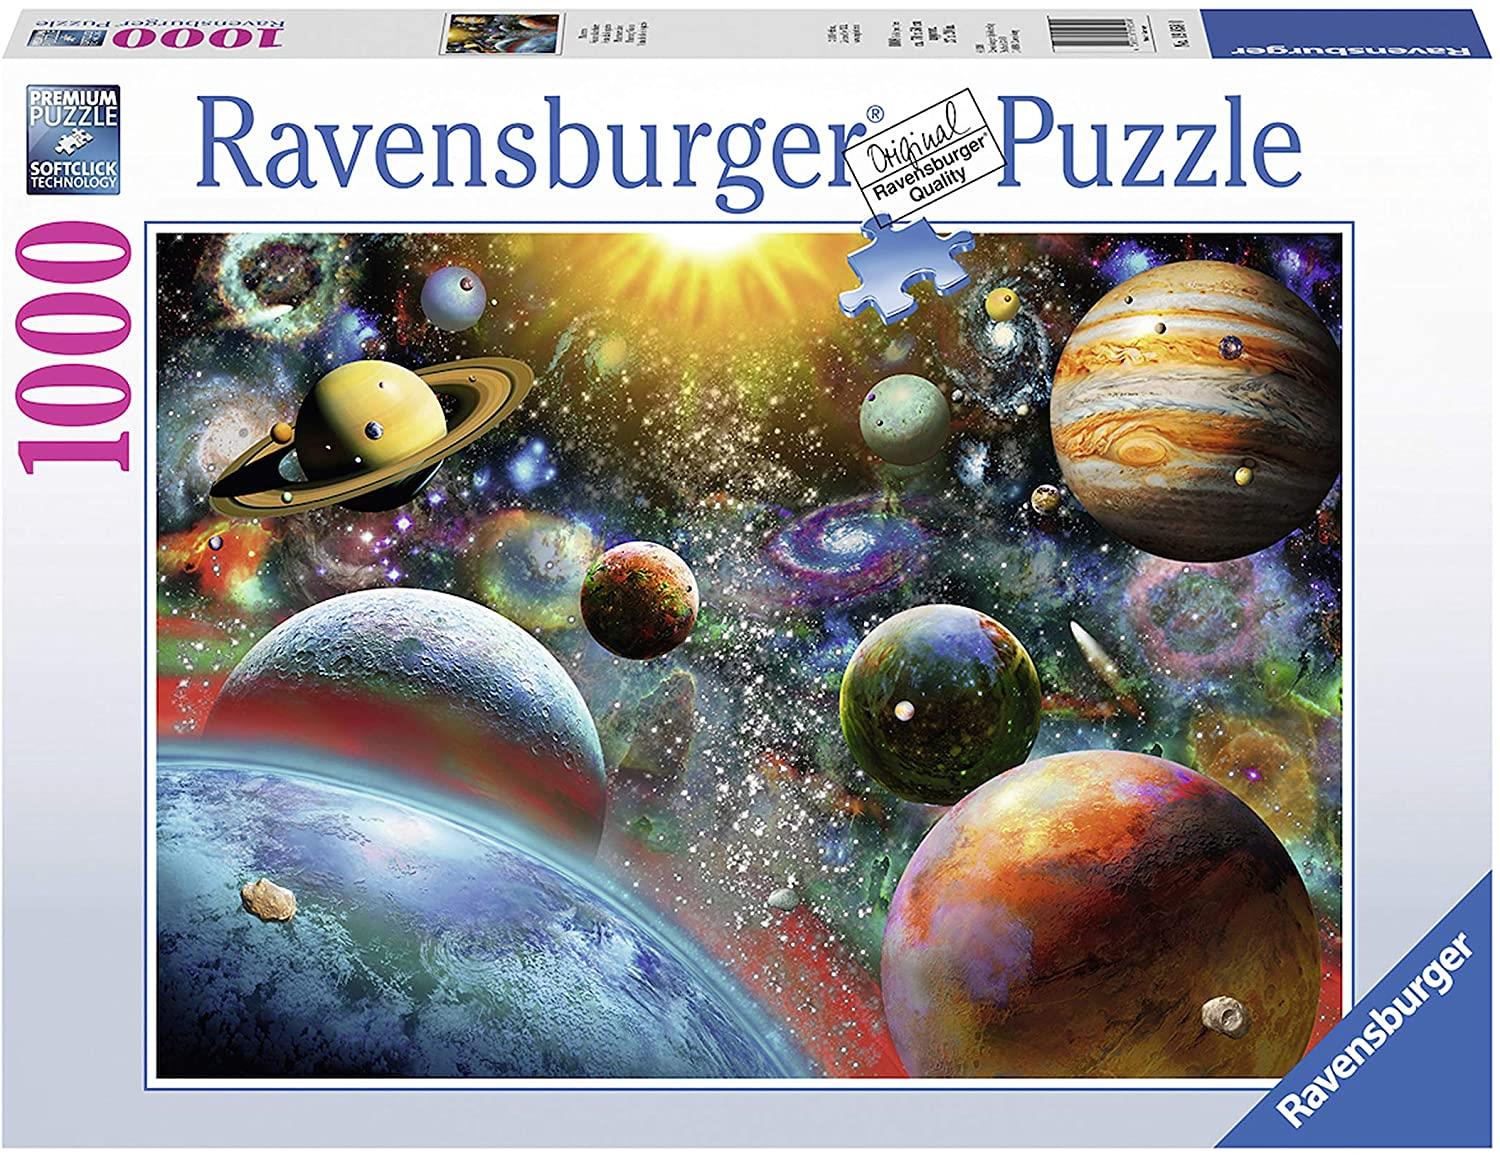 Ravensburger Planetary Vision Jigsaw Puzzle (1000 Pieces)